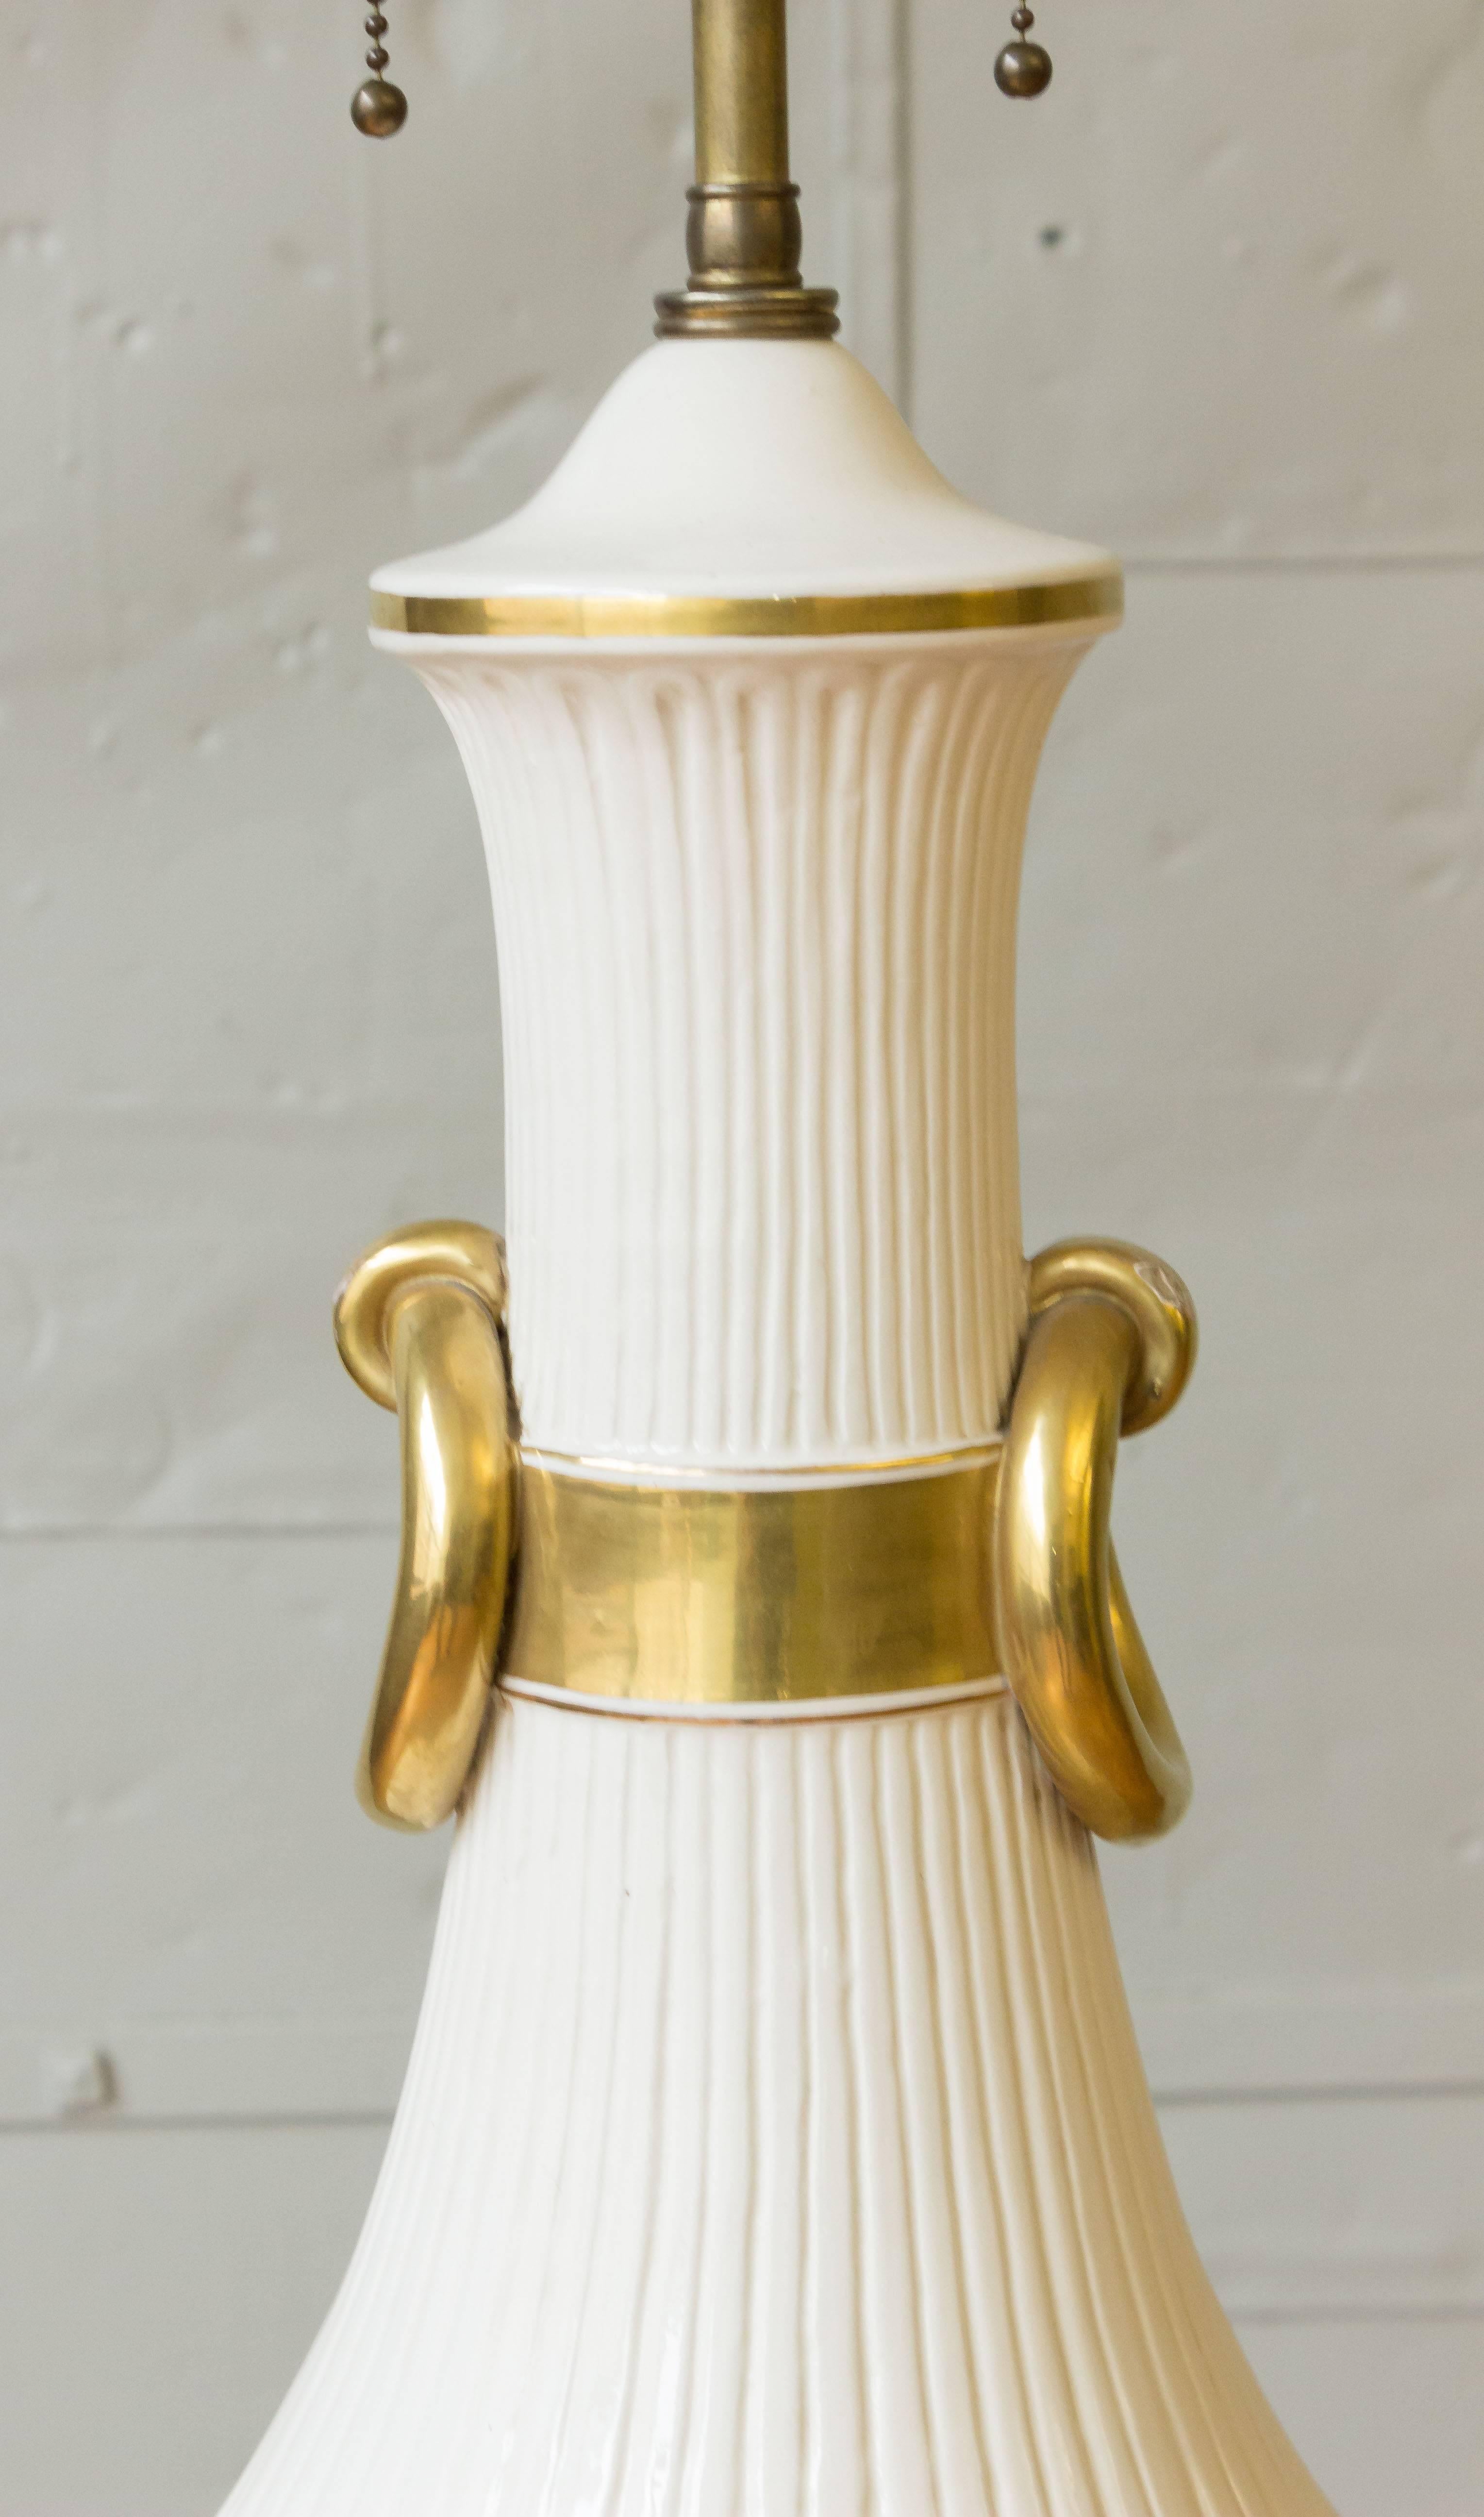 A very large French 1940s white soft-paste porcelain lamp with gold accents. This French lamp from the 1940s exudes elegance and sophistication with its very large, soft-paste porcelain body. Standing at an impressive 38 inches tall, it commands